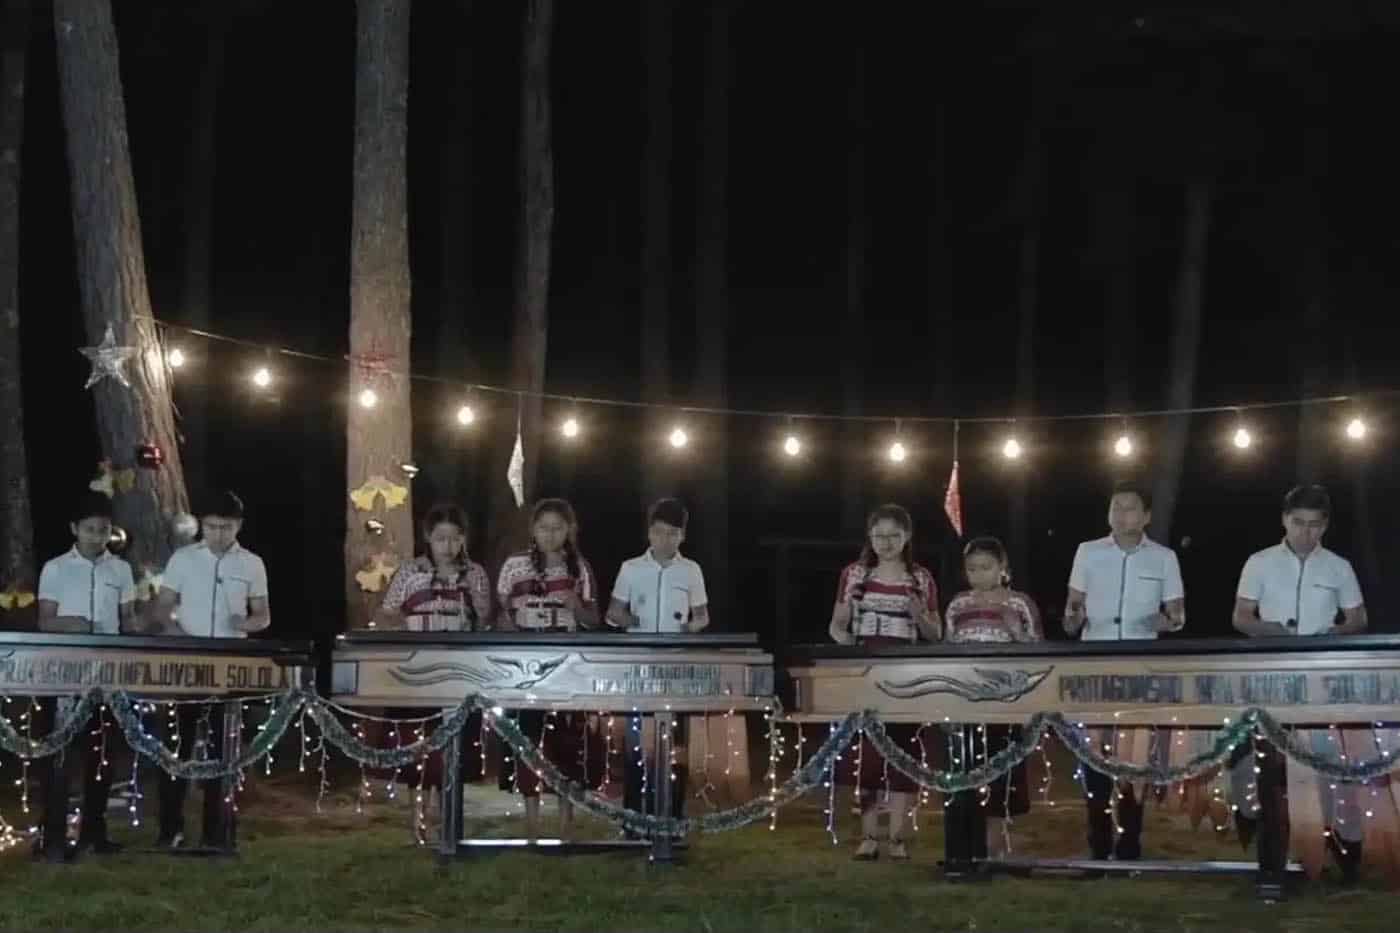 Children in Guatemala playing O Holy Night on xylophones.